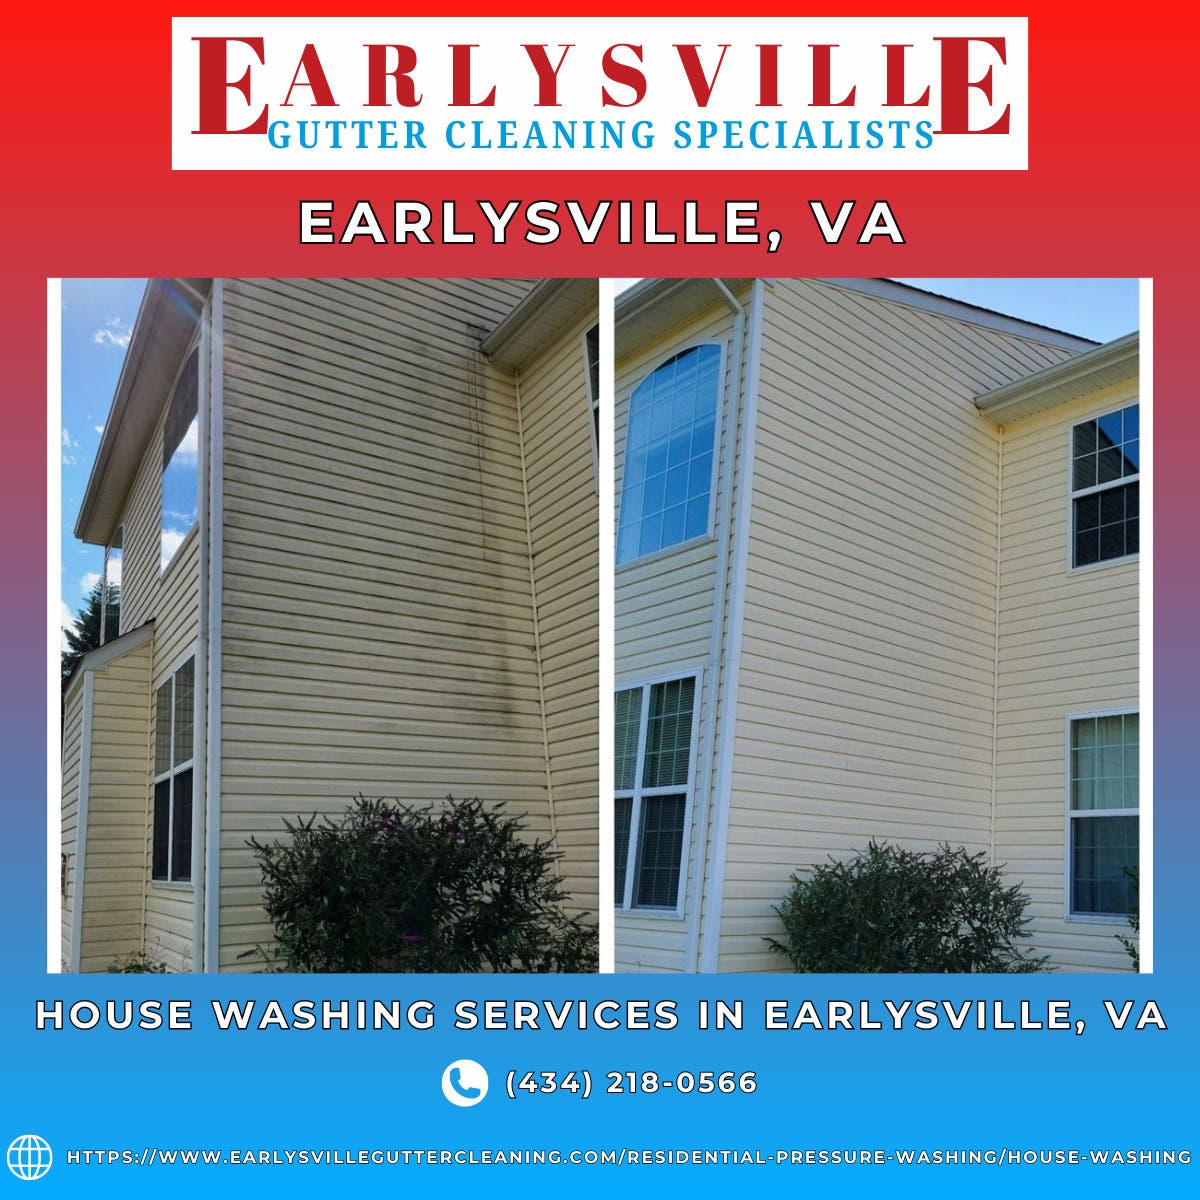 House Washing Services in Earlysville, VA - Earlysville Gutter Cleaning Specialists